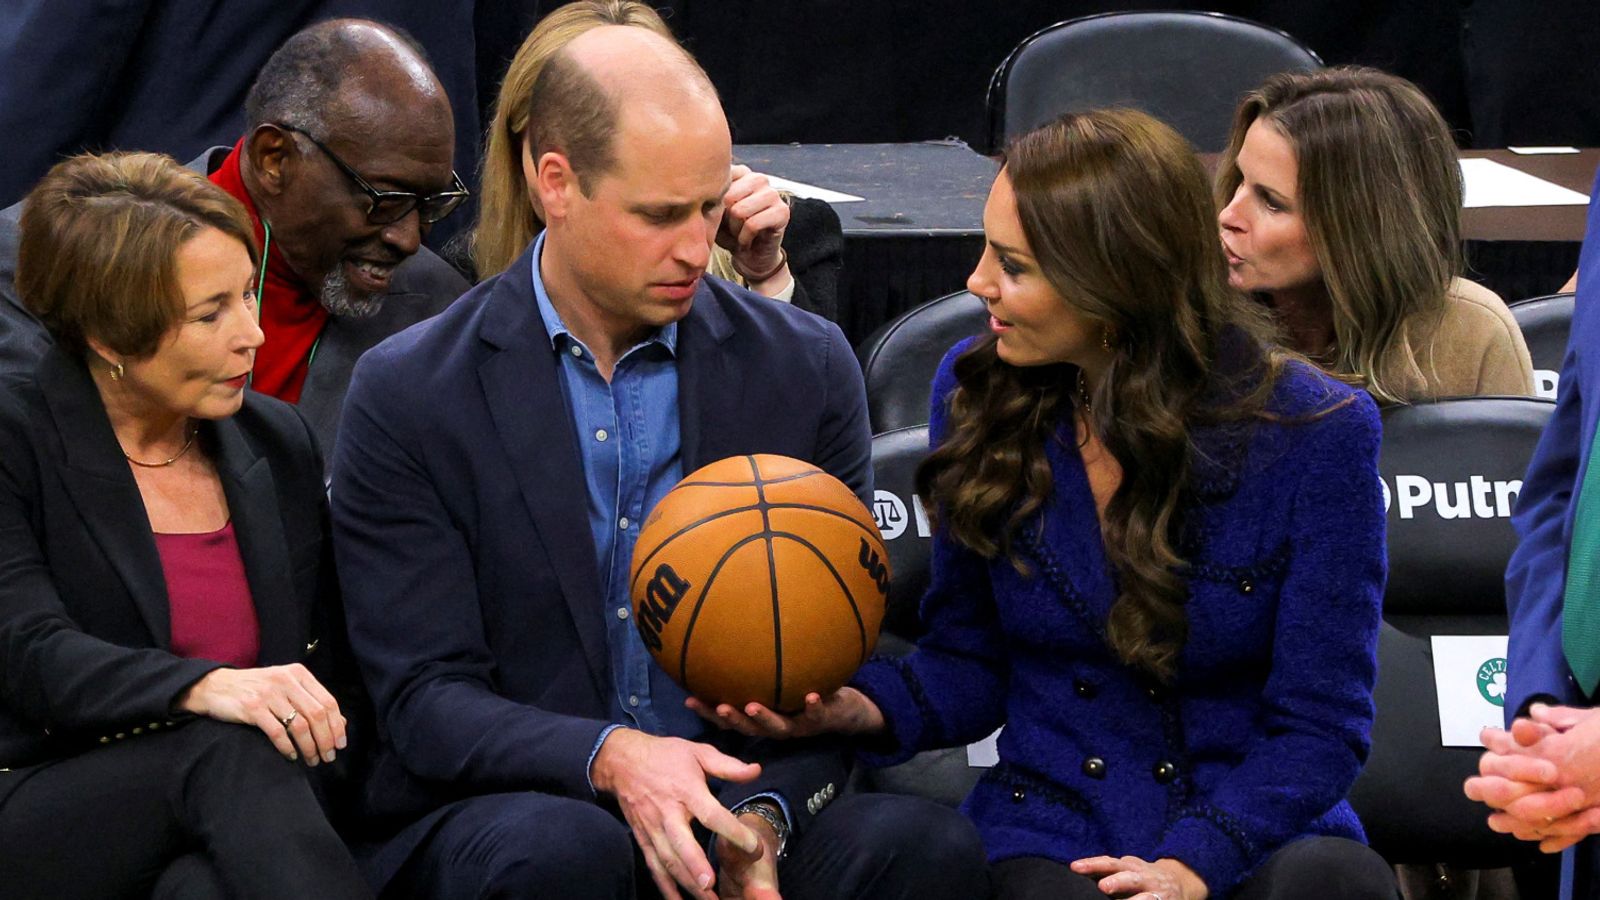 William and Kate met by chants of 'USA, USA' and pockets of booing as race row clouds visit